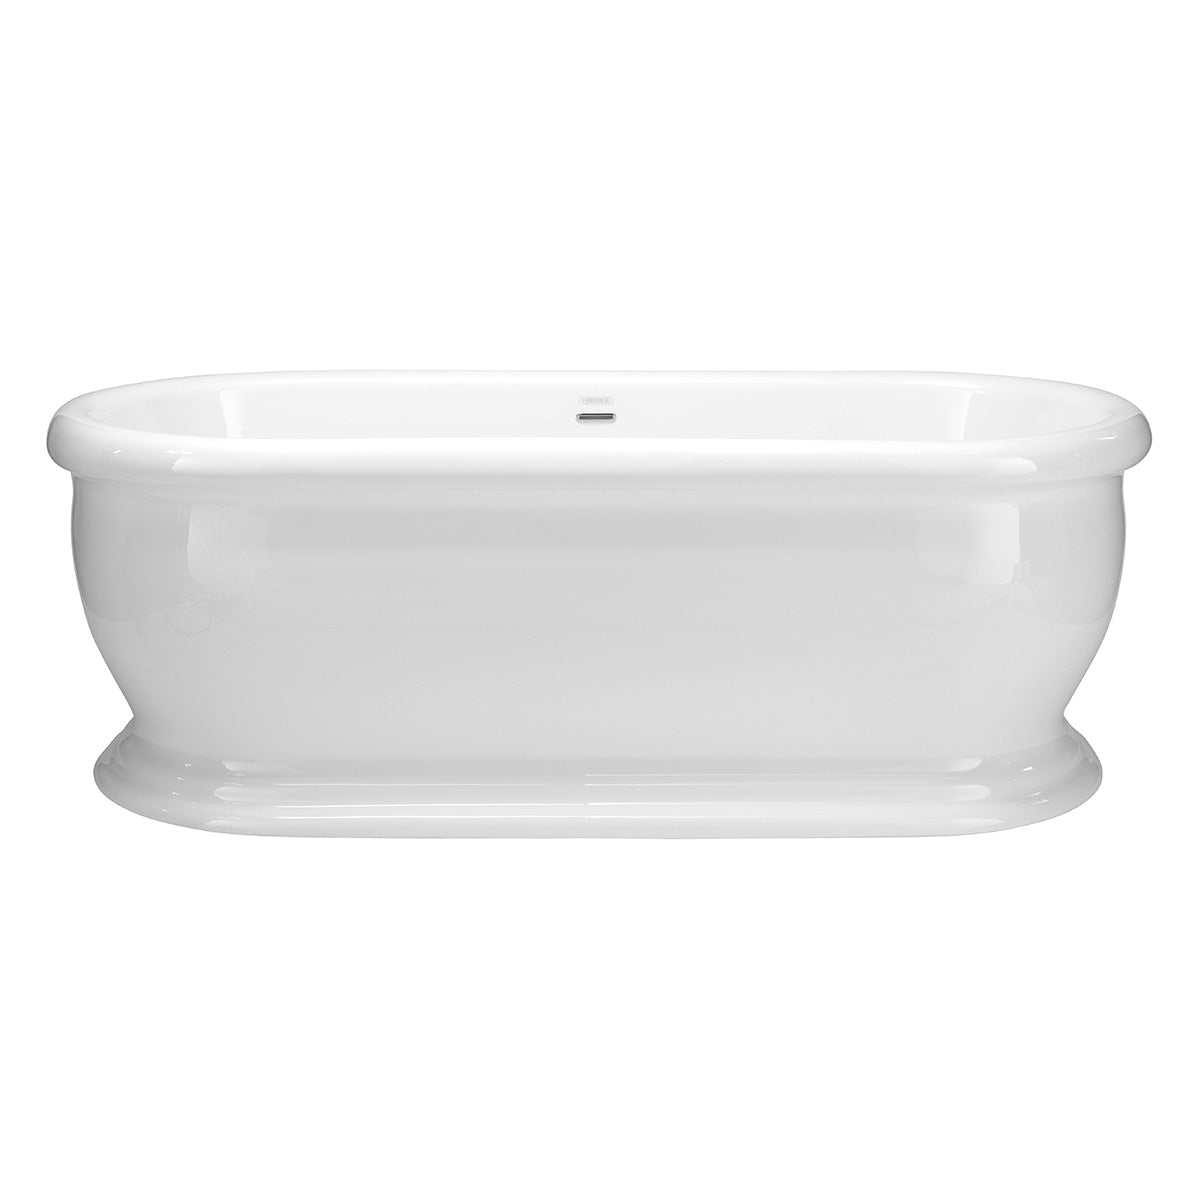 Heritage Derrymore 1745mm Roll Top Freestanding Double-Ended Bath Acrylic